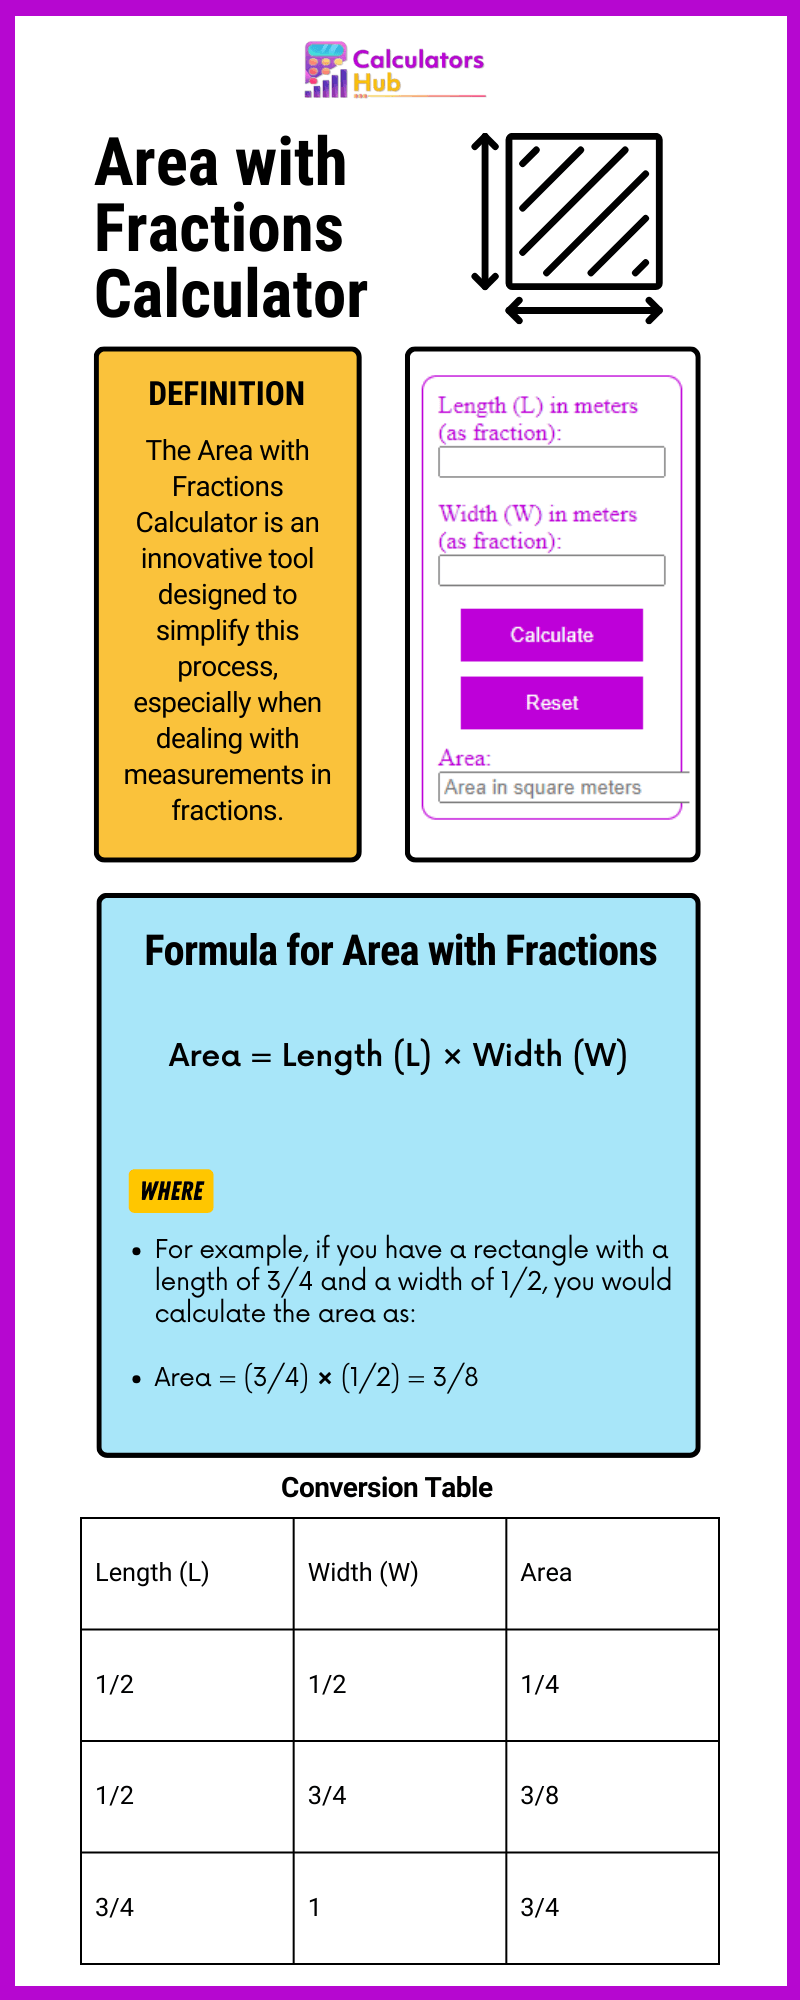 Area with Fractions Calculator